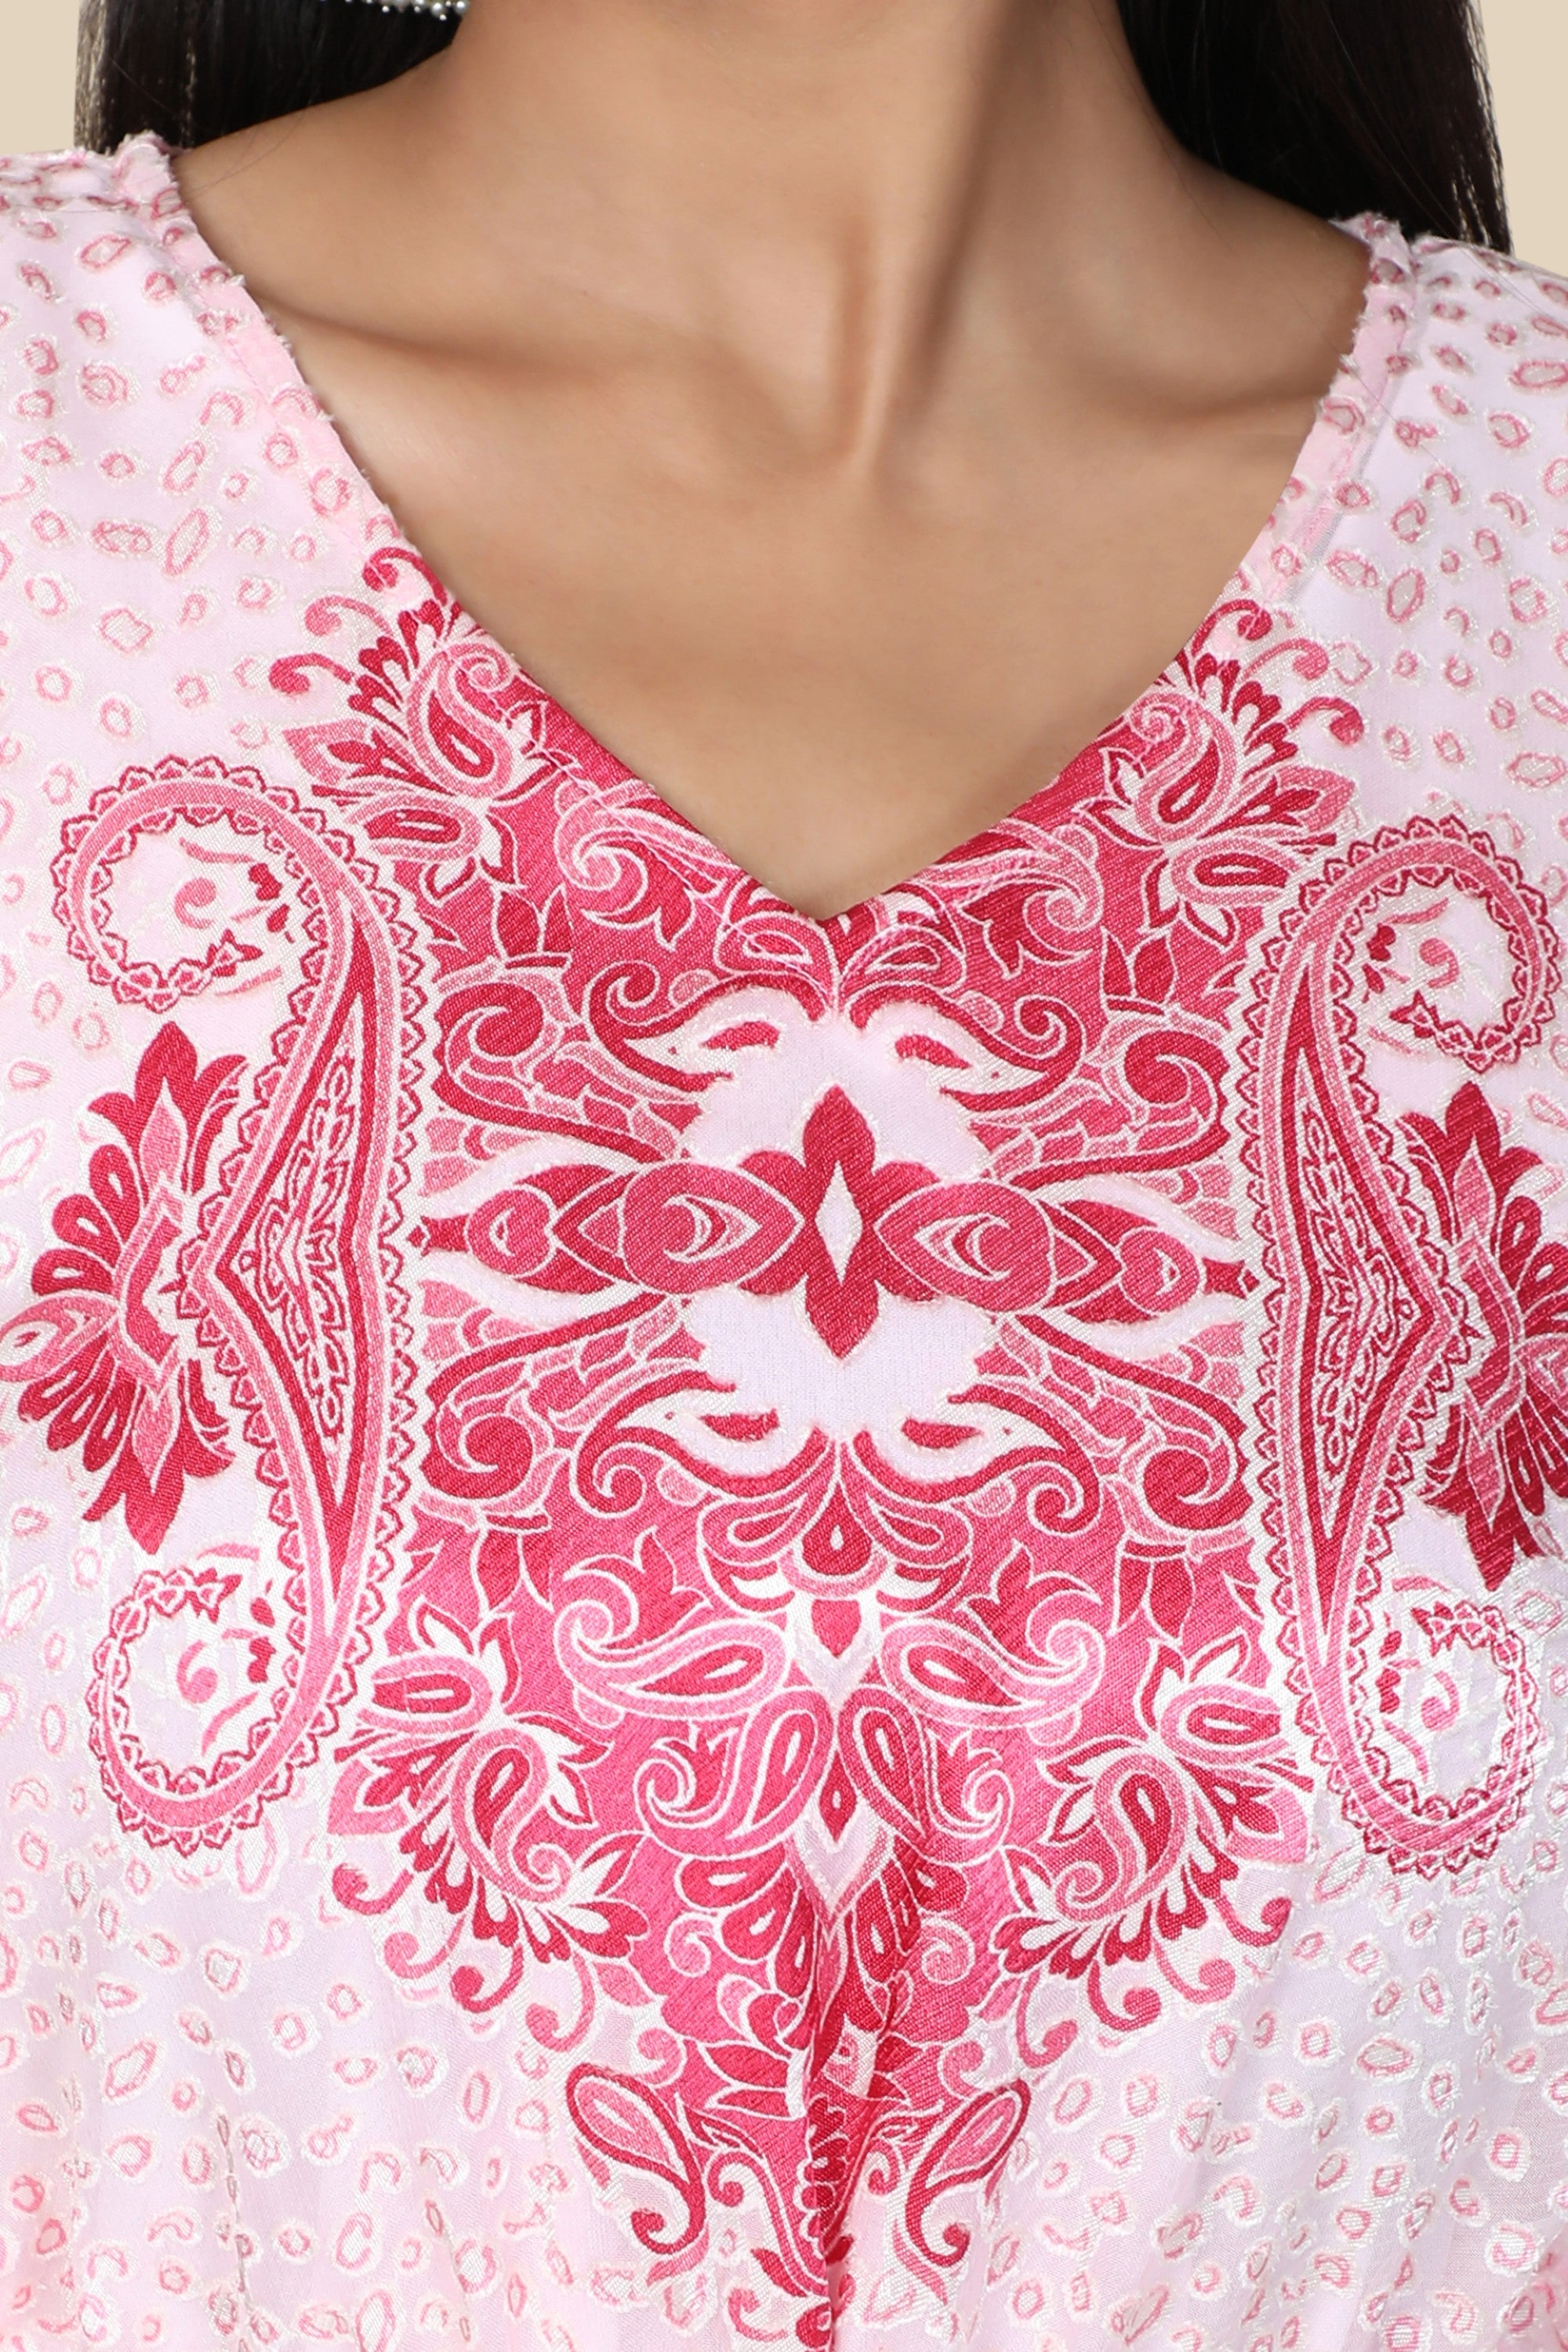 Women's Baby Pink Printed Long Kaftan In Georgette Brasso Self Fabric With Inner - MIRACOLOS by Ruchi